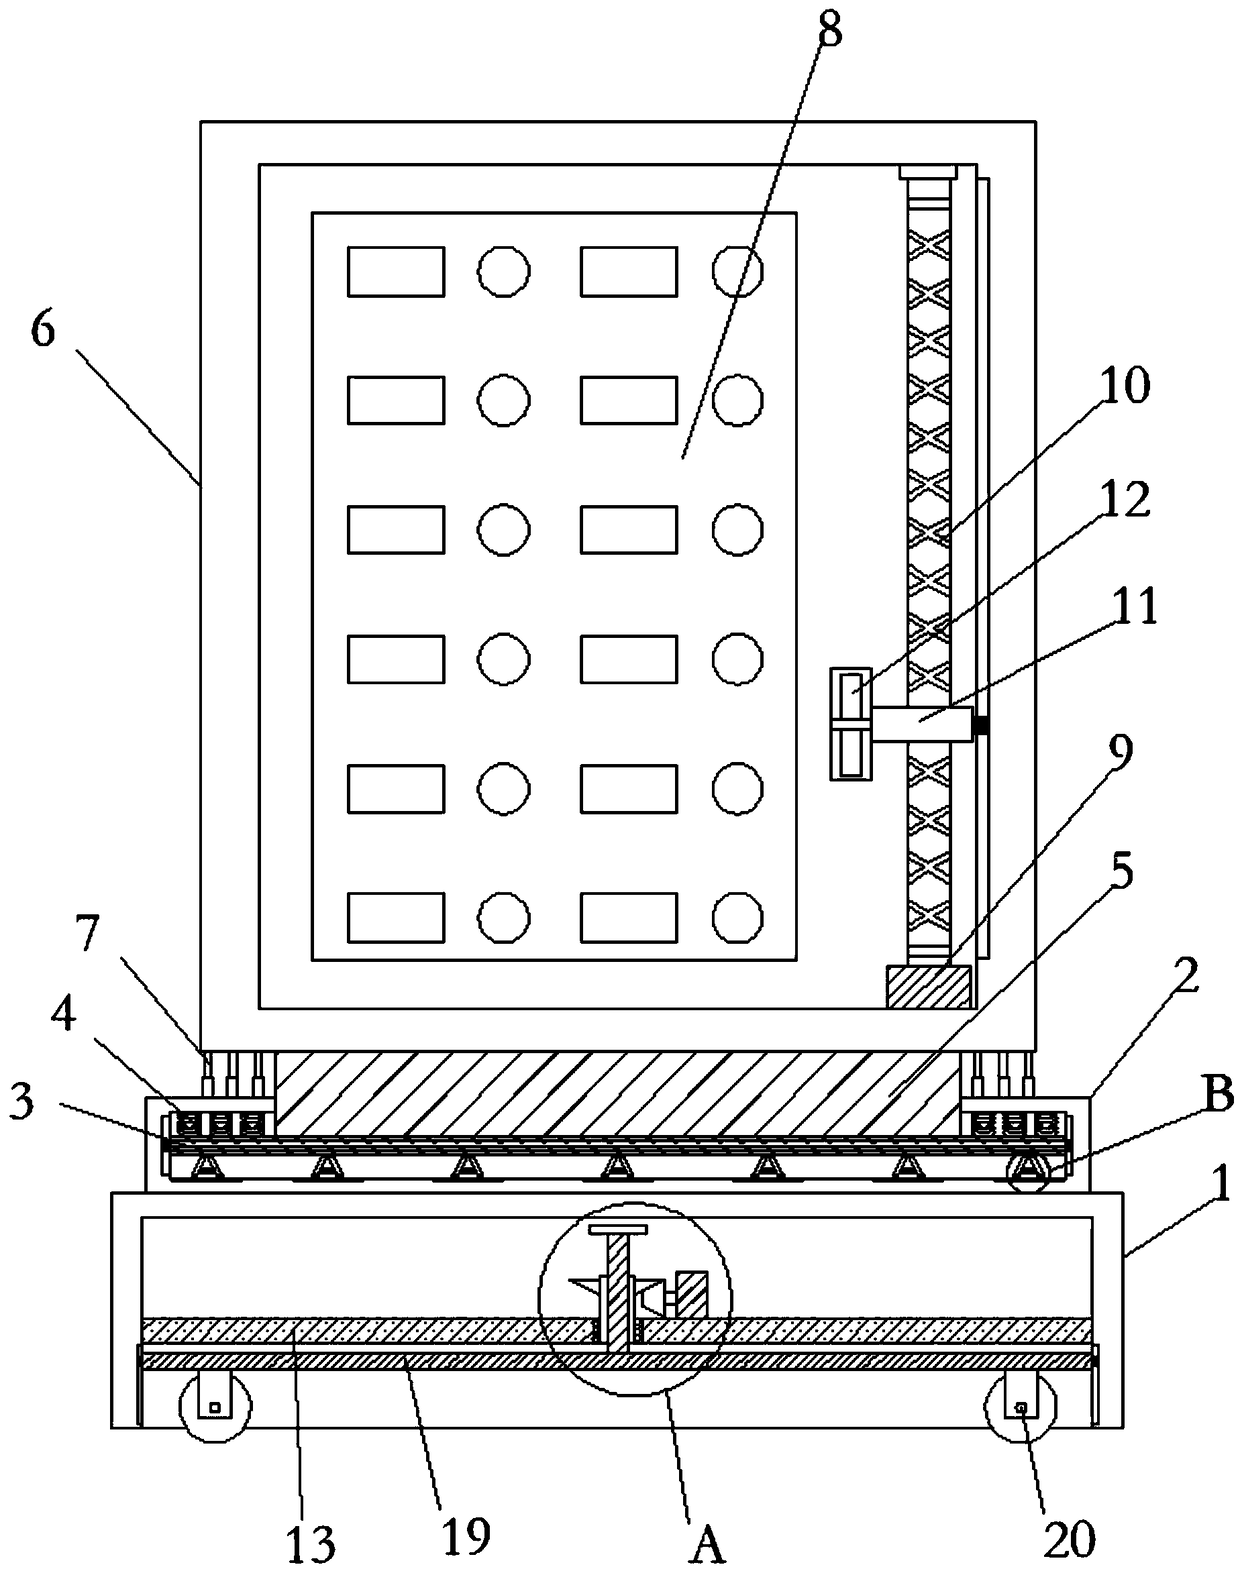 Indoor layered positioning device based on composite positioning technology